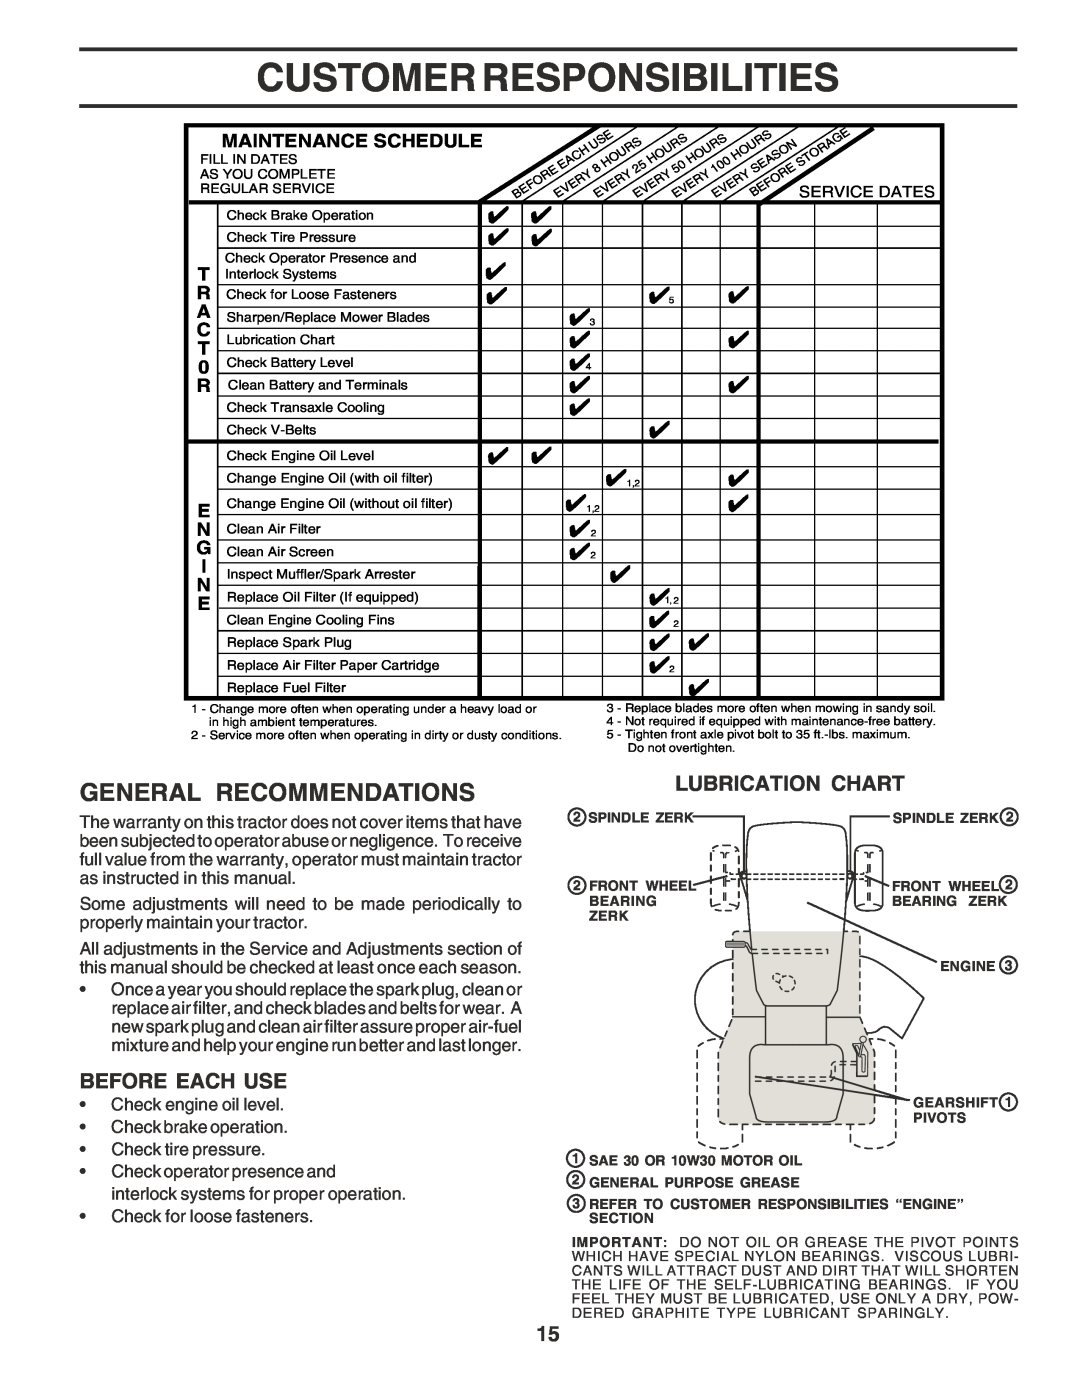 Poulan PR1842STA owner manual Customer Responsibilities, General Recommendations, Lubrication Chart, Before Each Use 